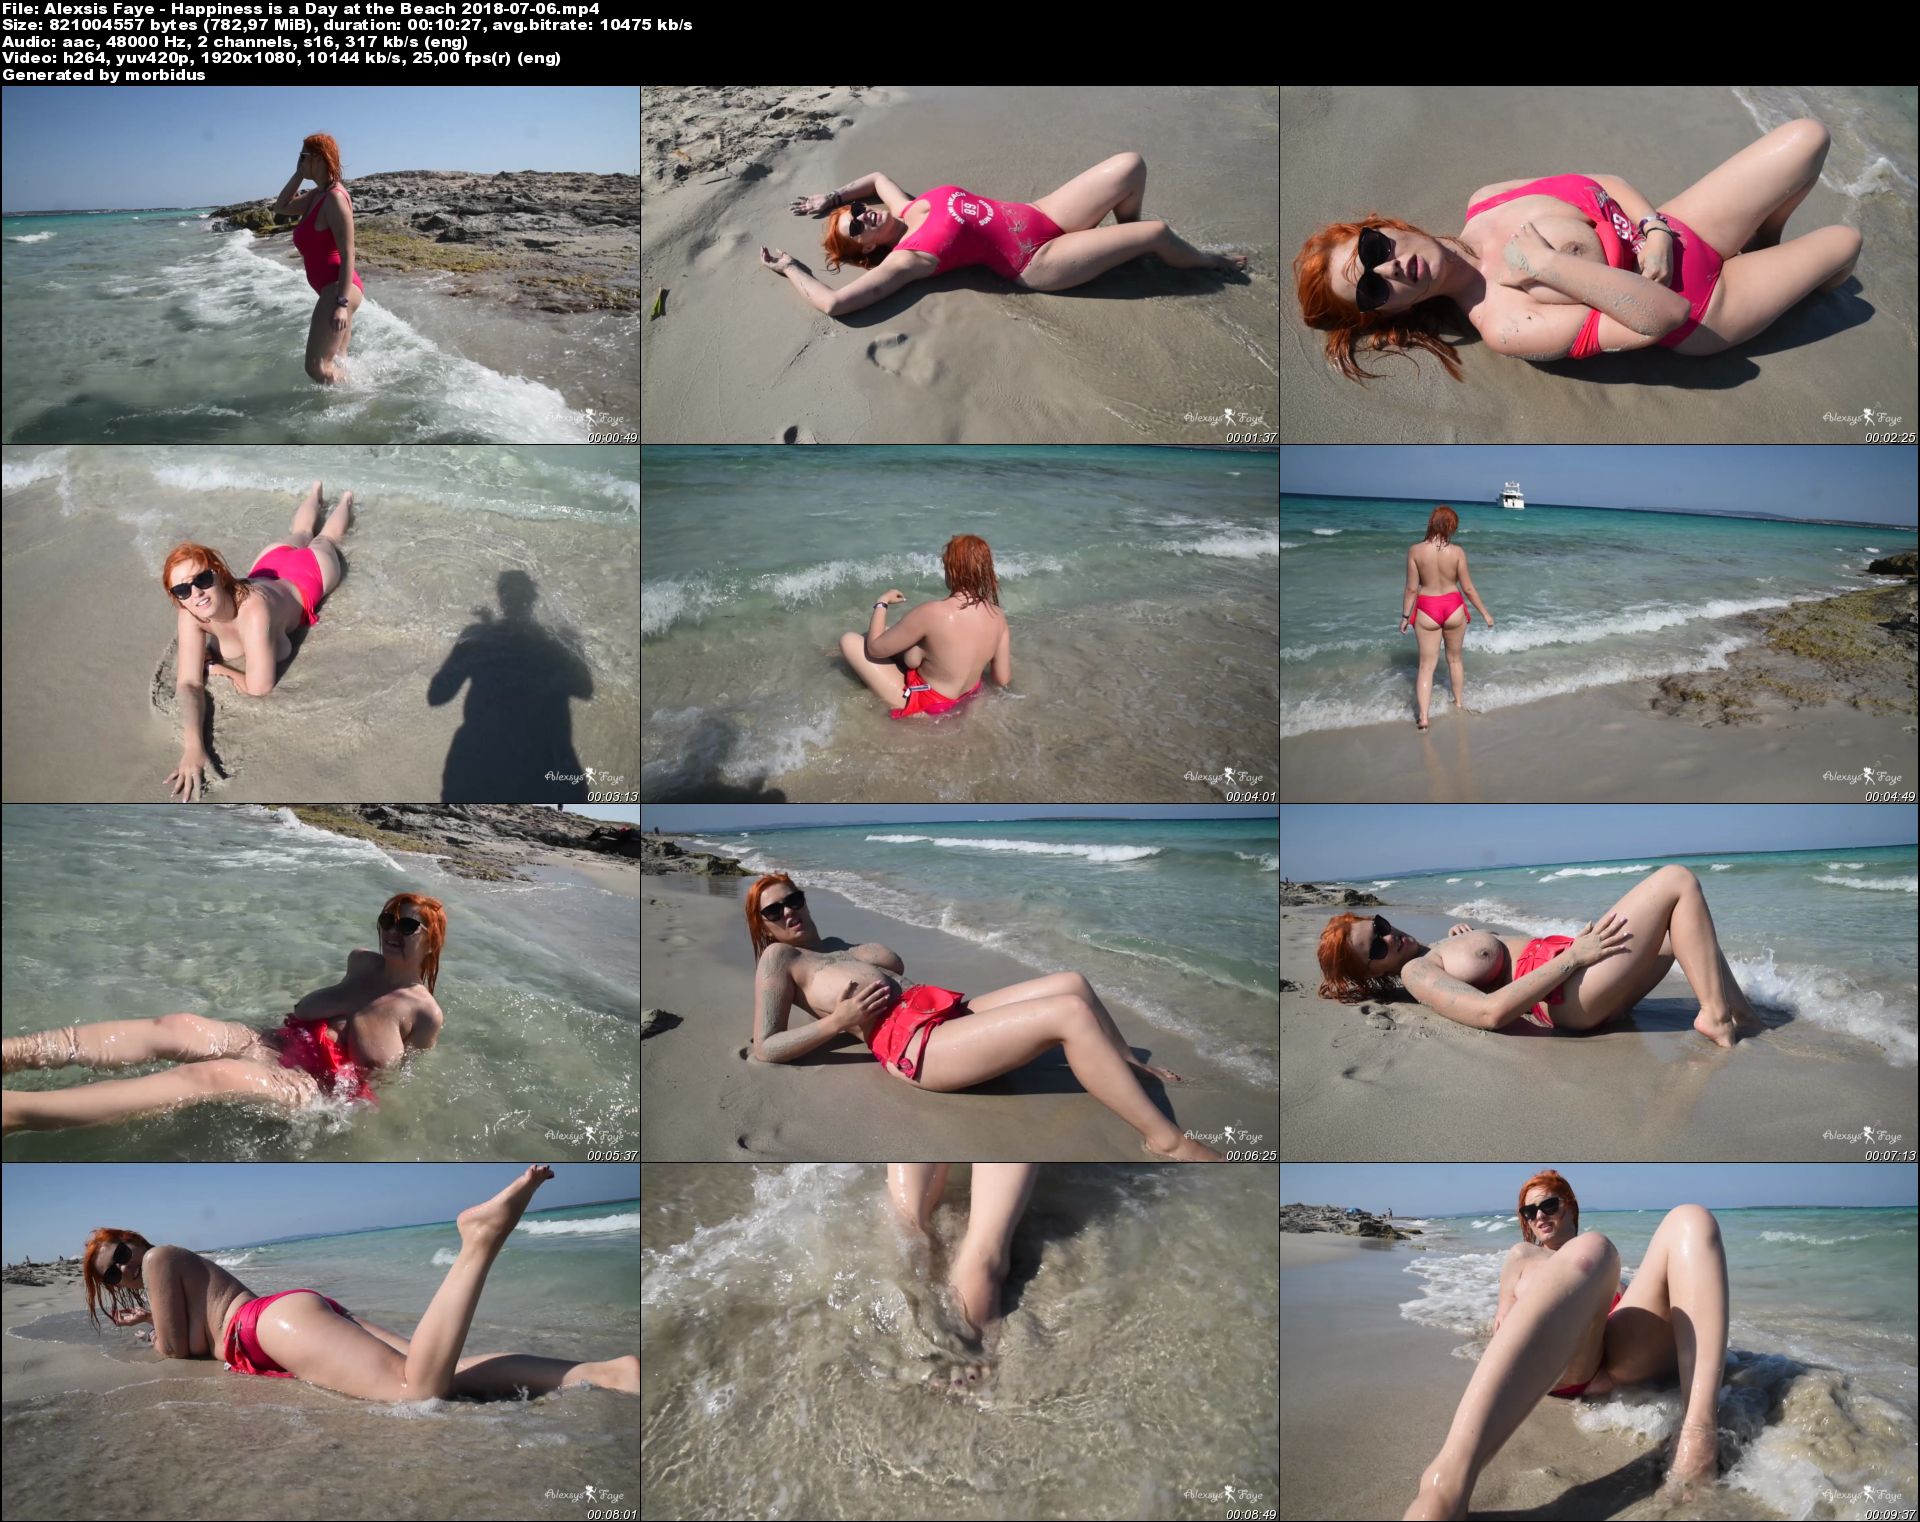 Alexsis Faye - Happiness is a Day at the Beach 2018-07-06.jpeg